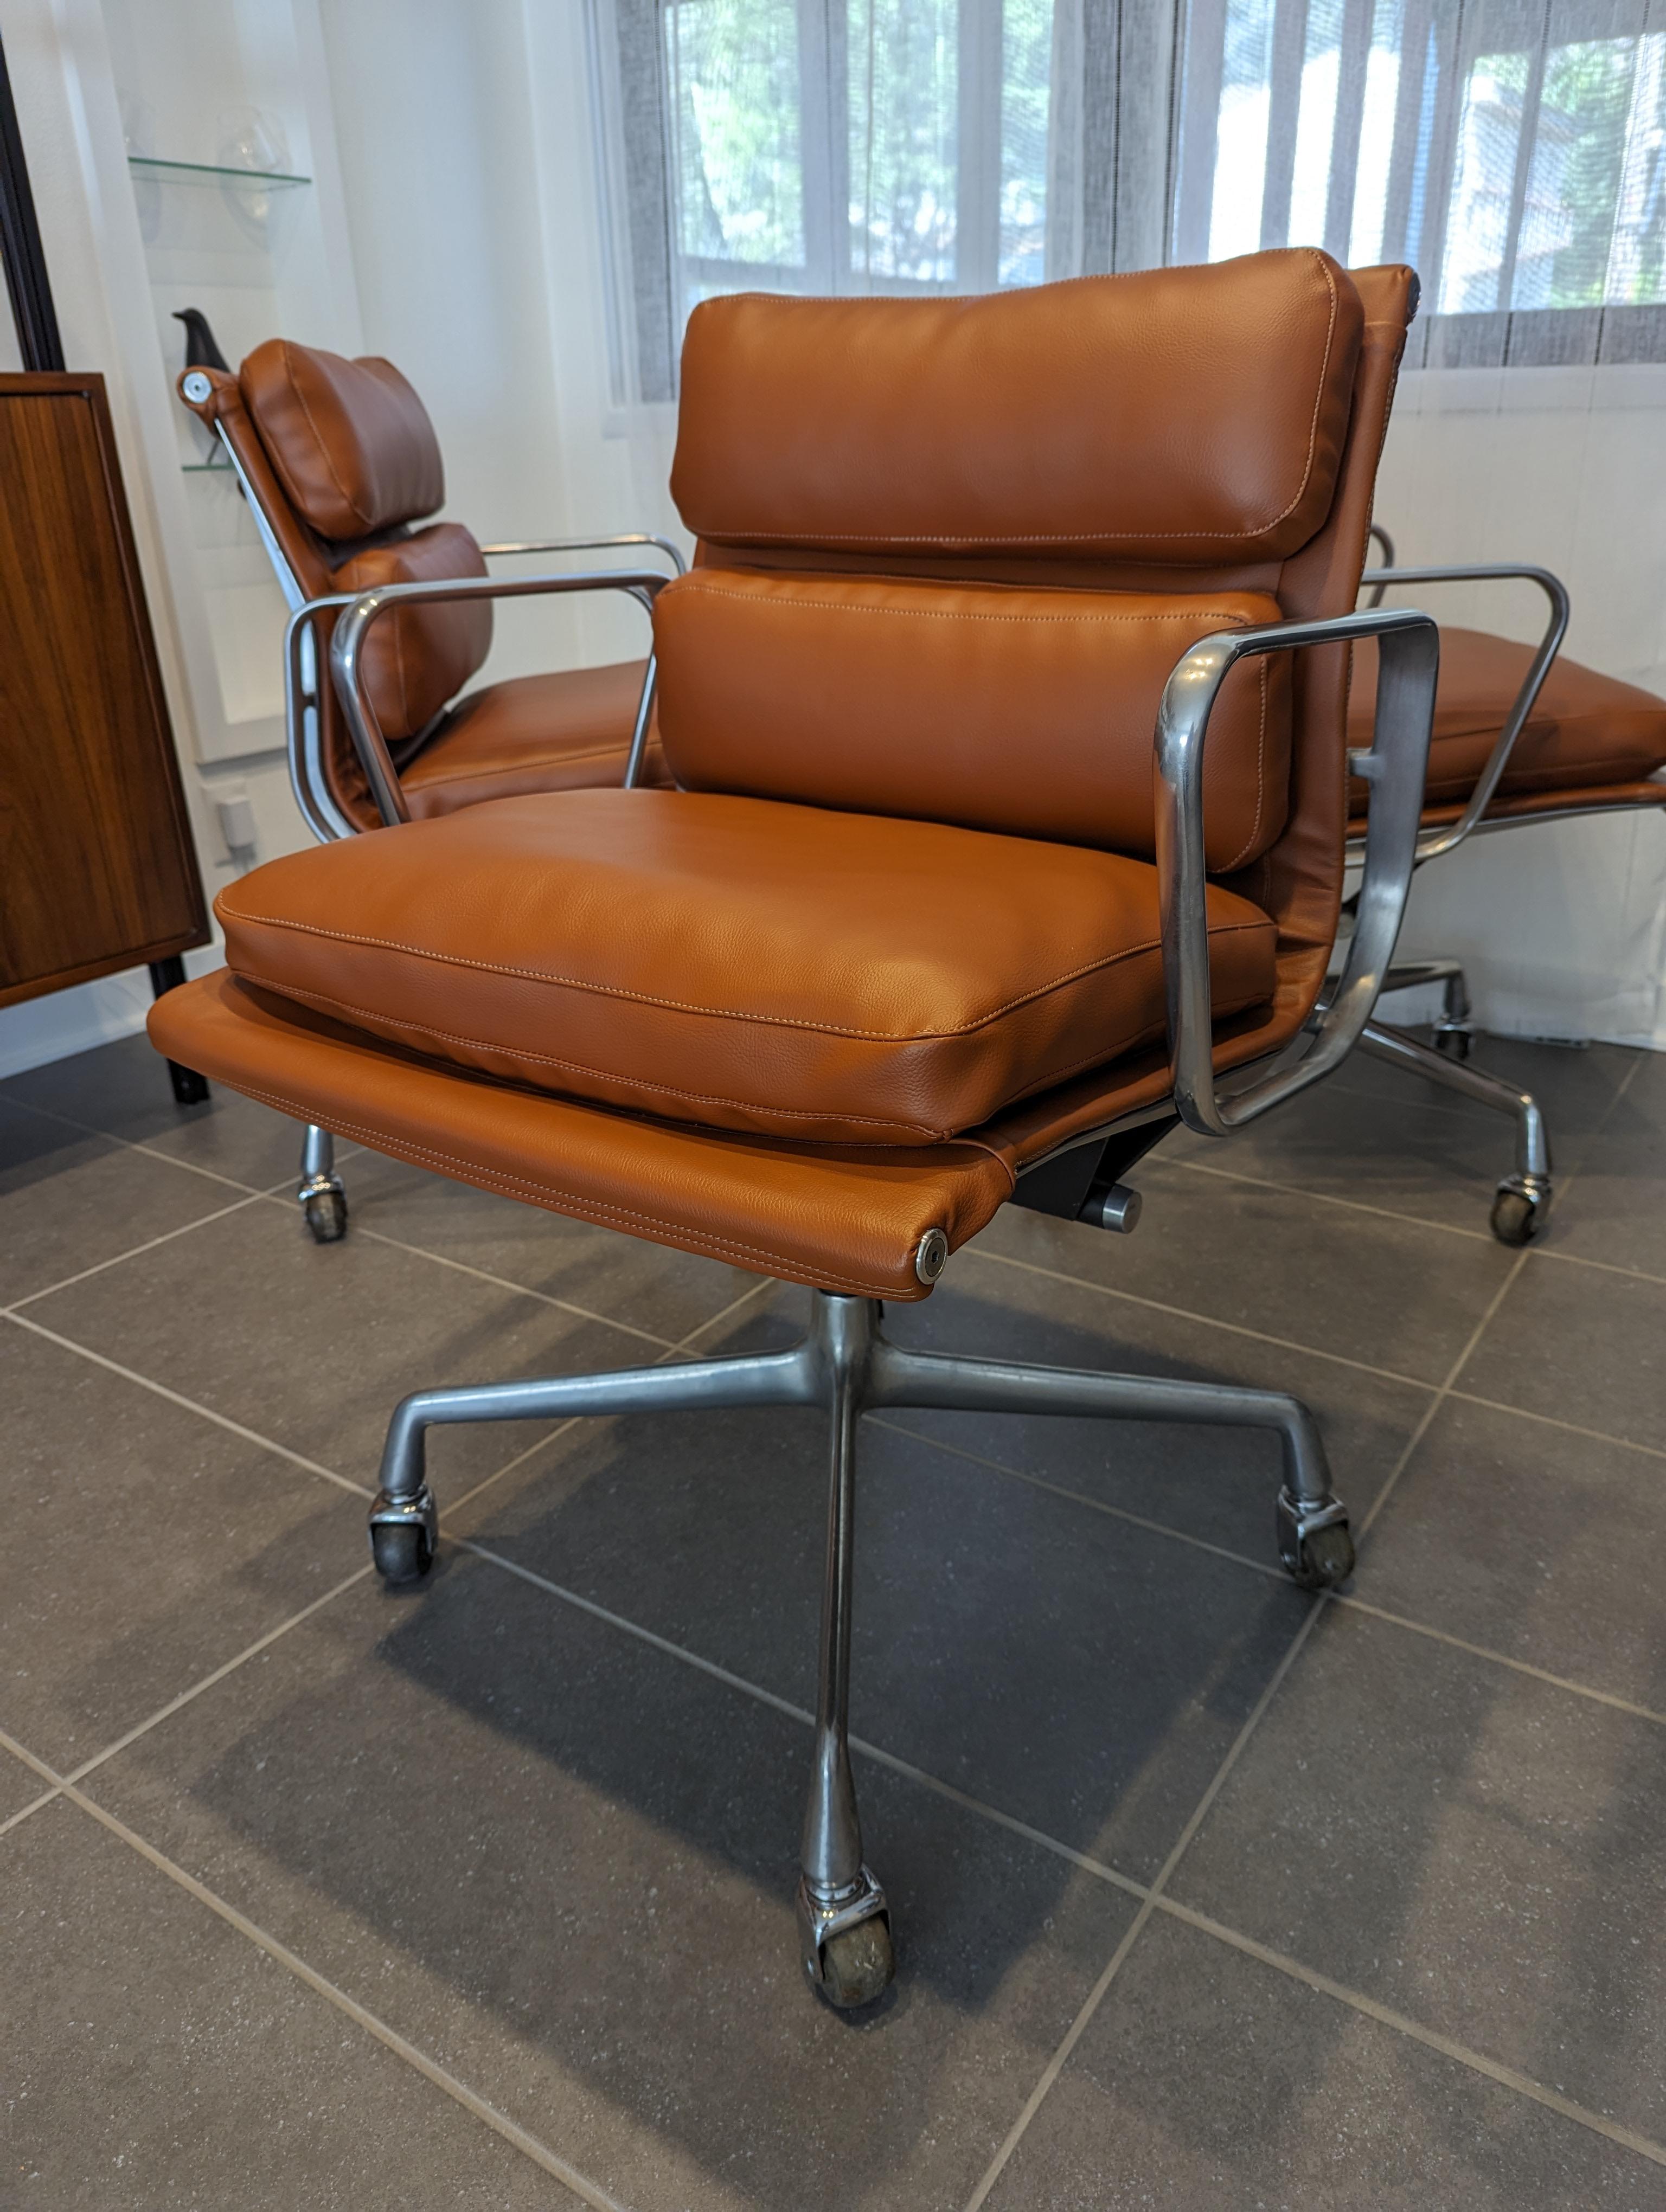 Cognac management height armchairs with wheels and armrests. Swivel and height and tilt adjustable. Can be turned on itself.

Pictured at 34 inches tall, 23 inches wide, 22 inches deep. Seat height at 22 inches as pictured. Adjustable height and